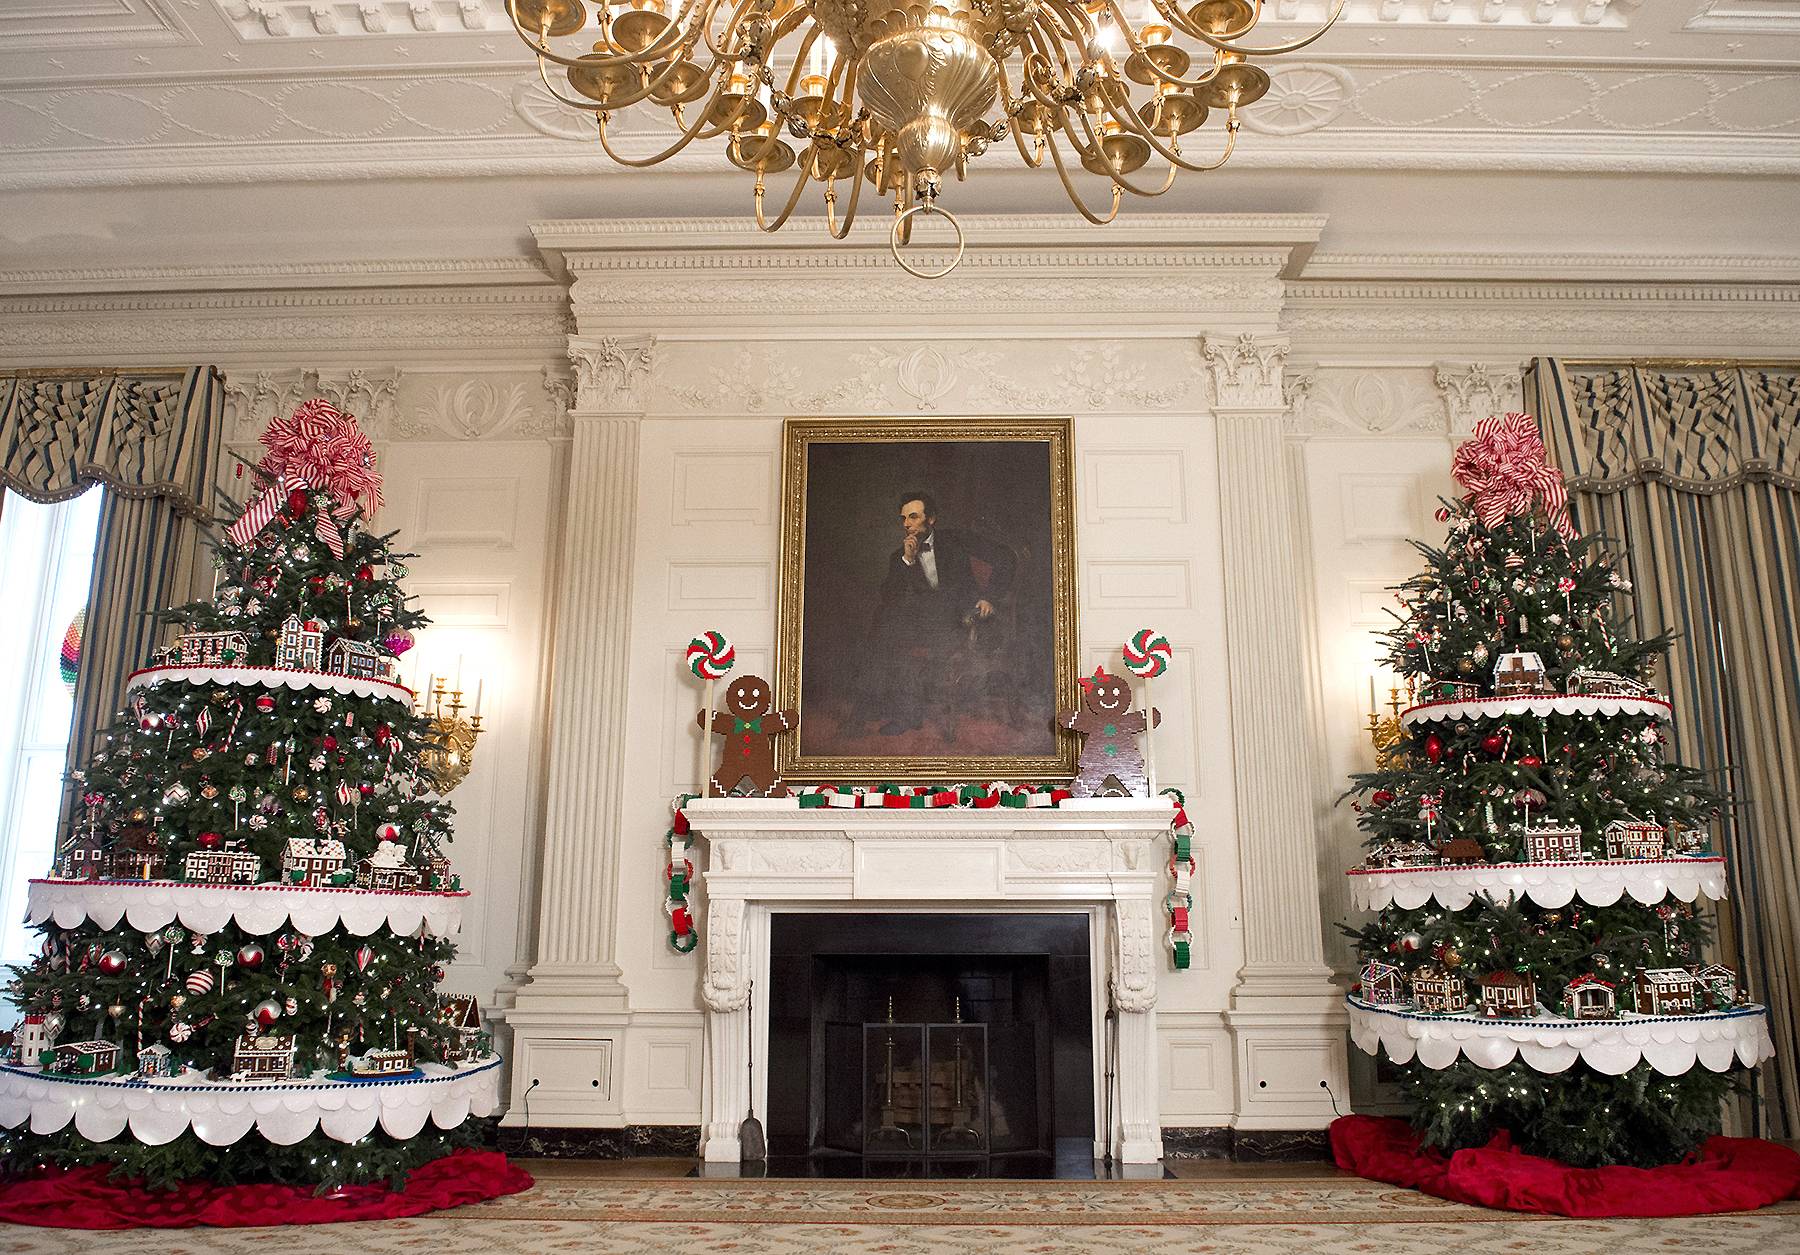 The Last Obama Christmas in the White House